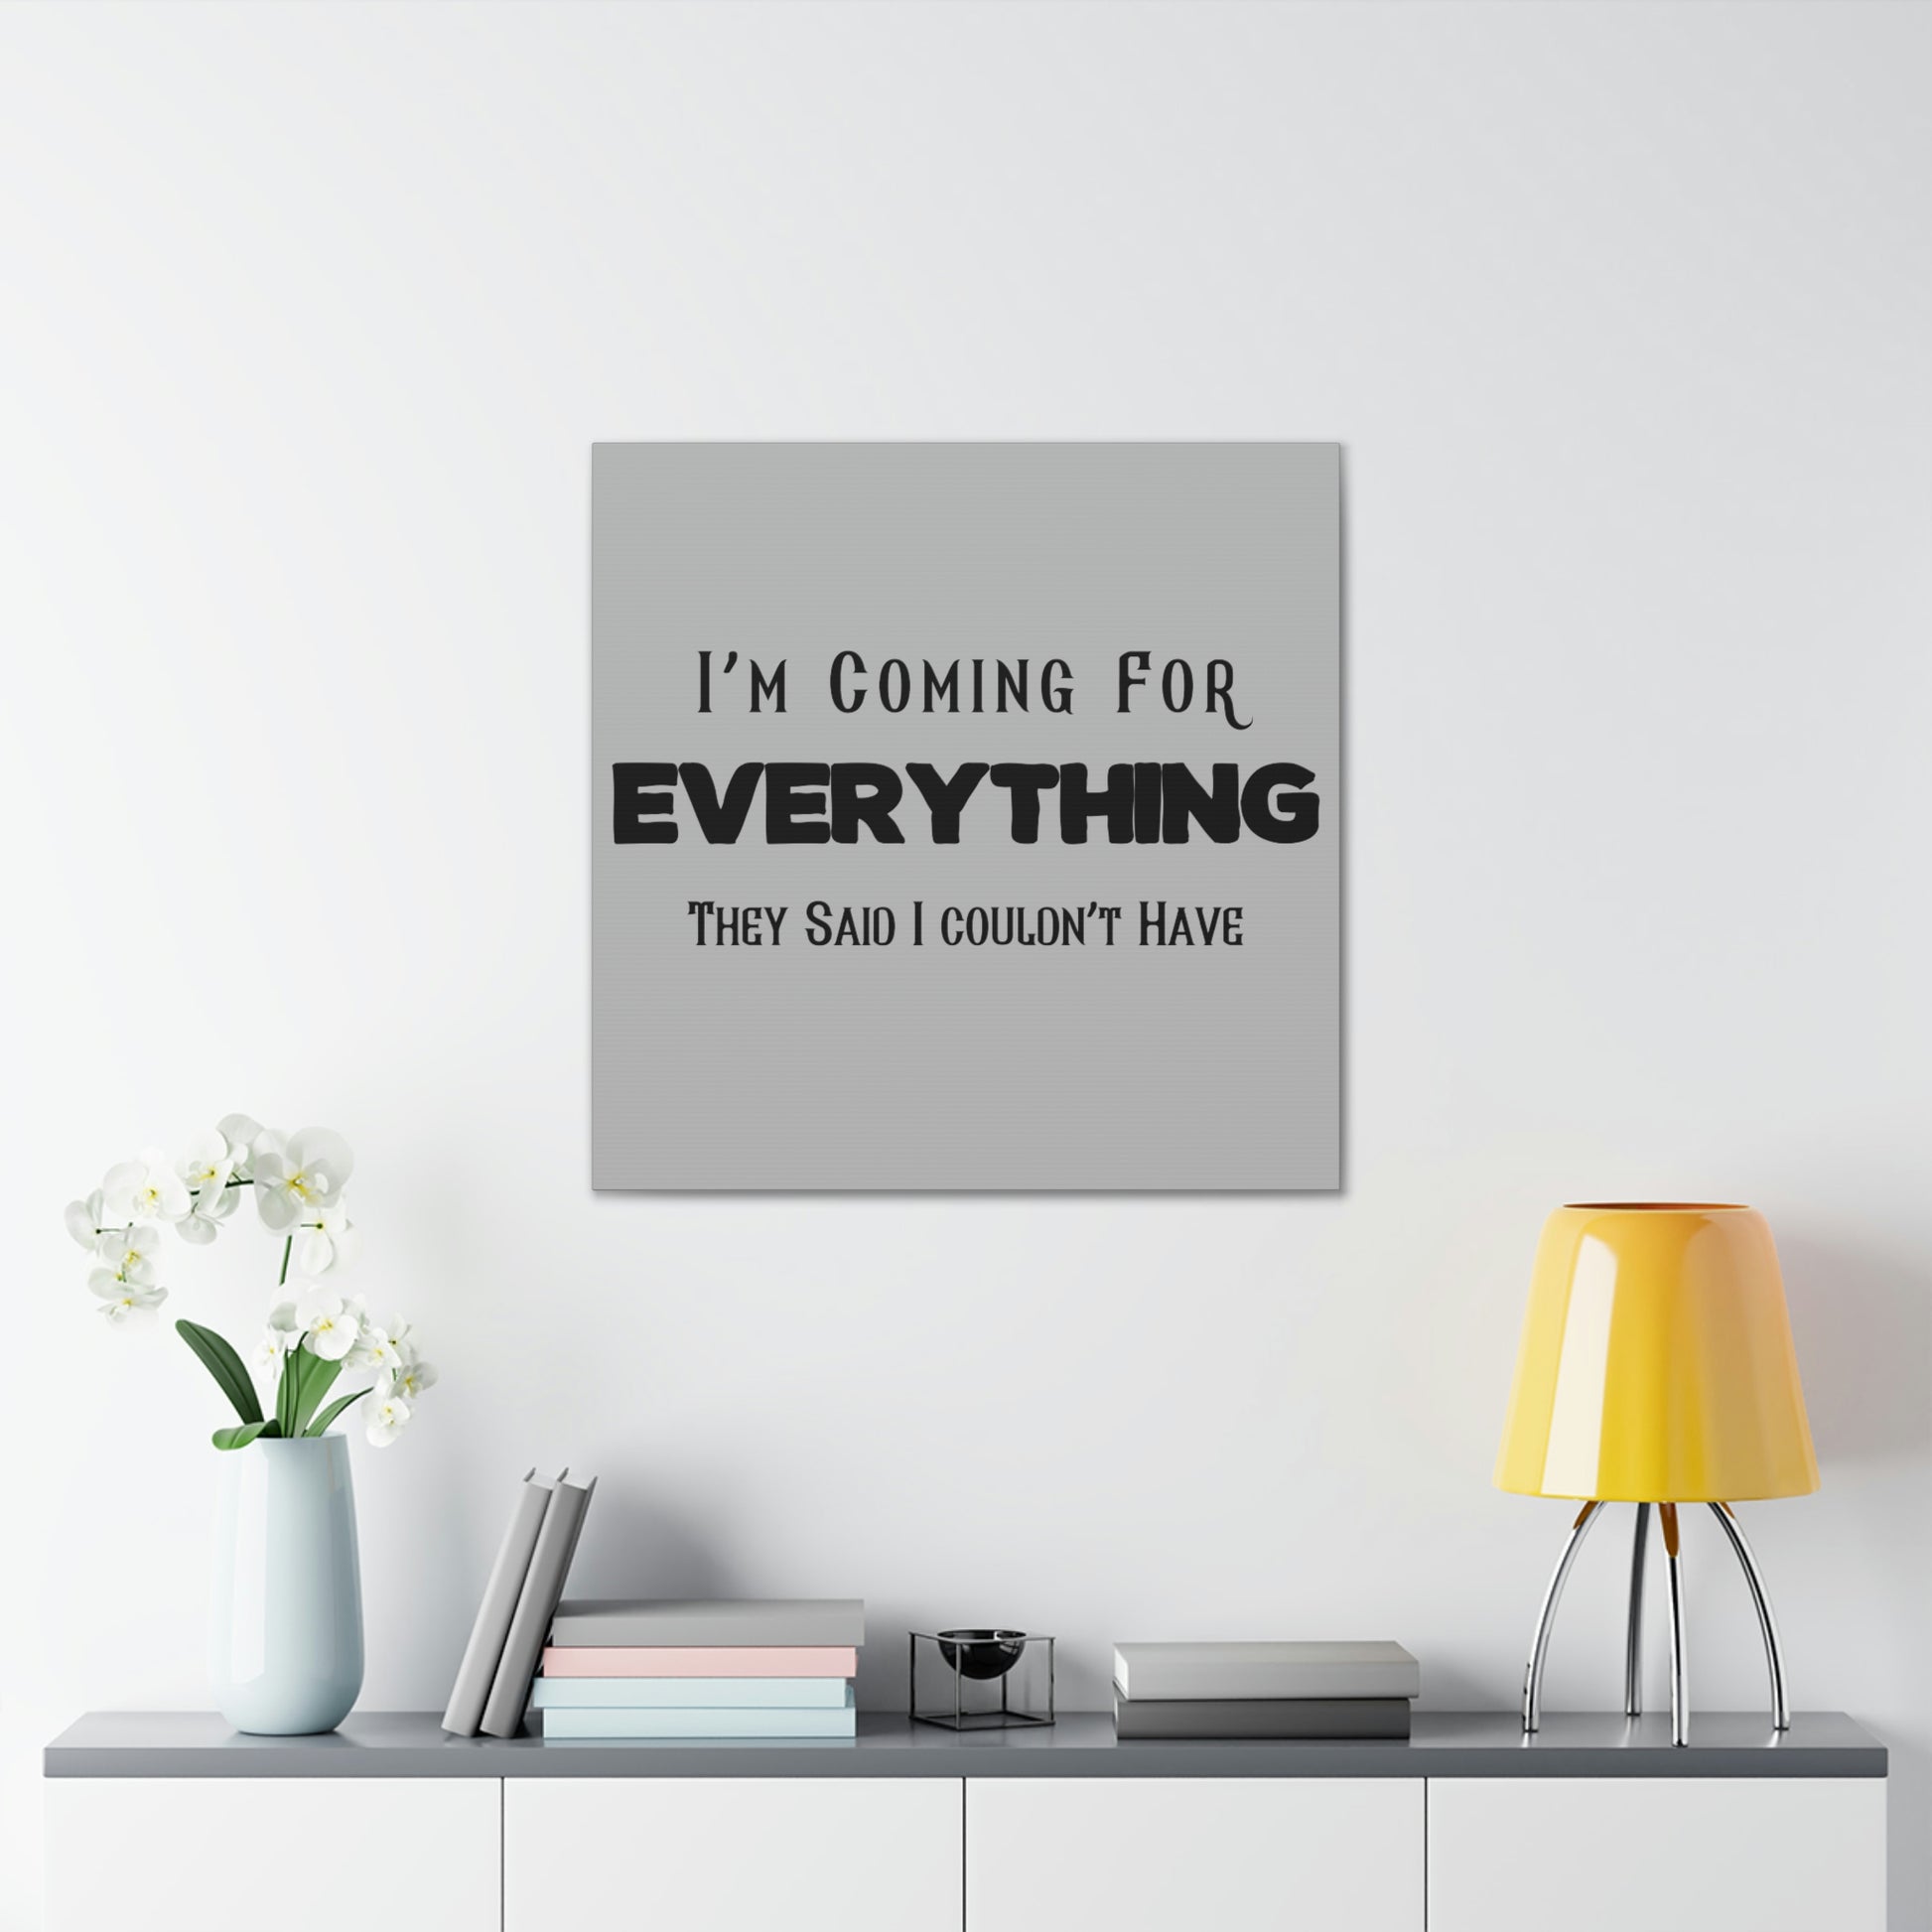 "I'm Coming For Everything They Said I Couldn't Have" Wall Art - Weave Got Gifts - Unique Gifts You Won’t Find Anywhere Else!